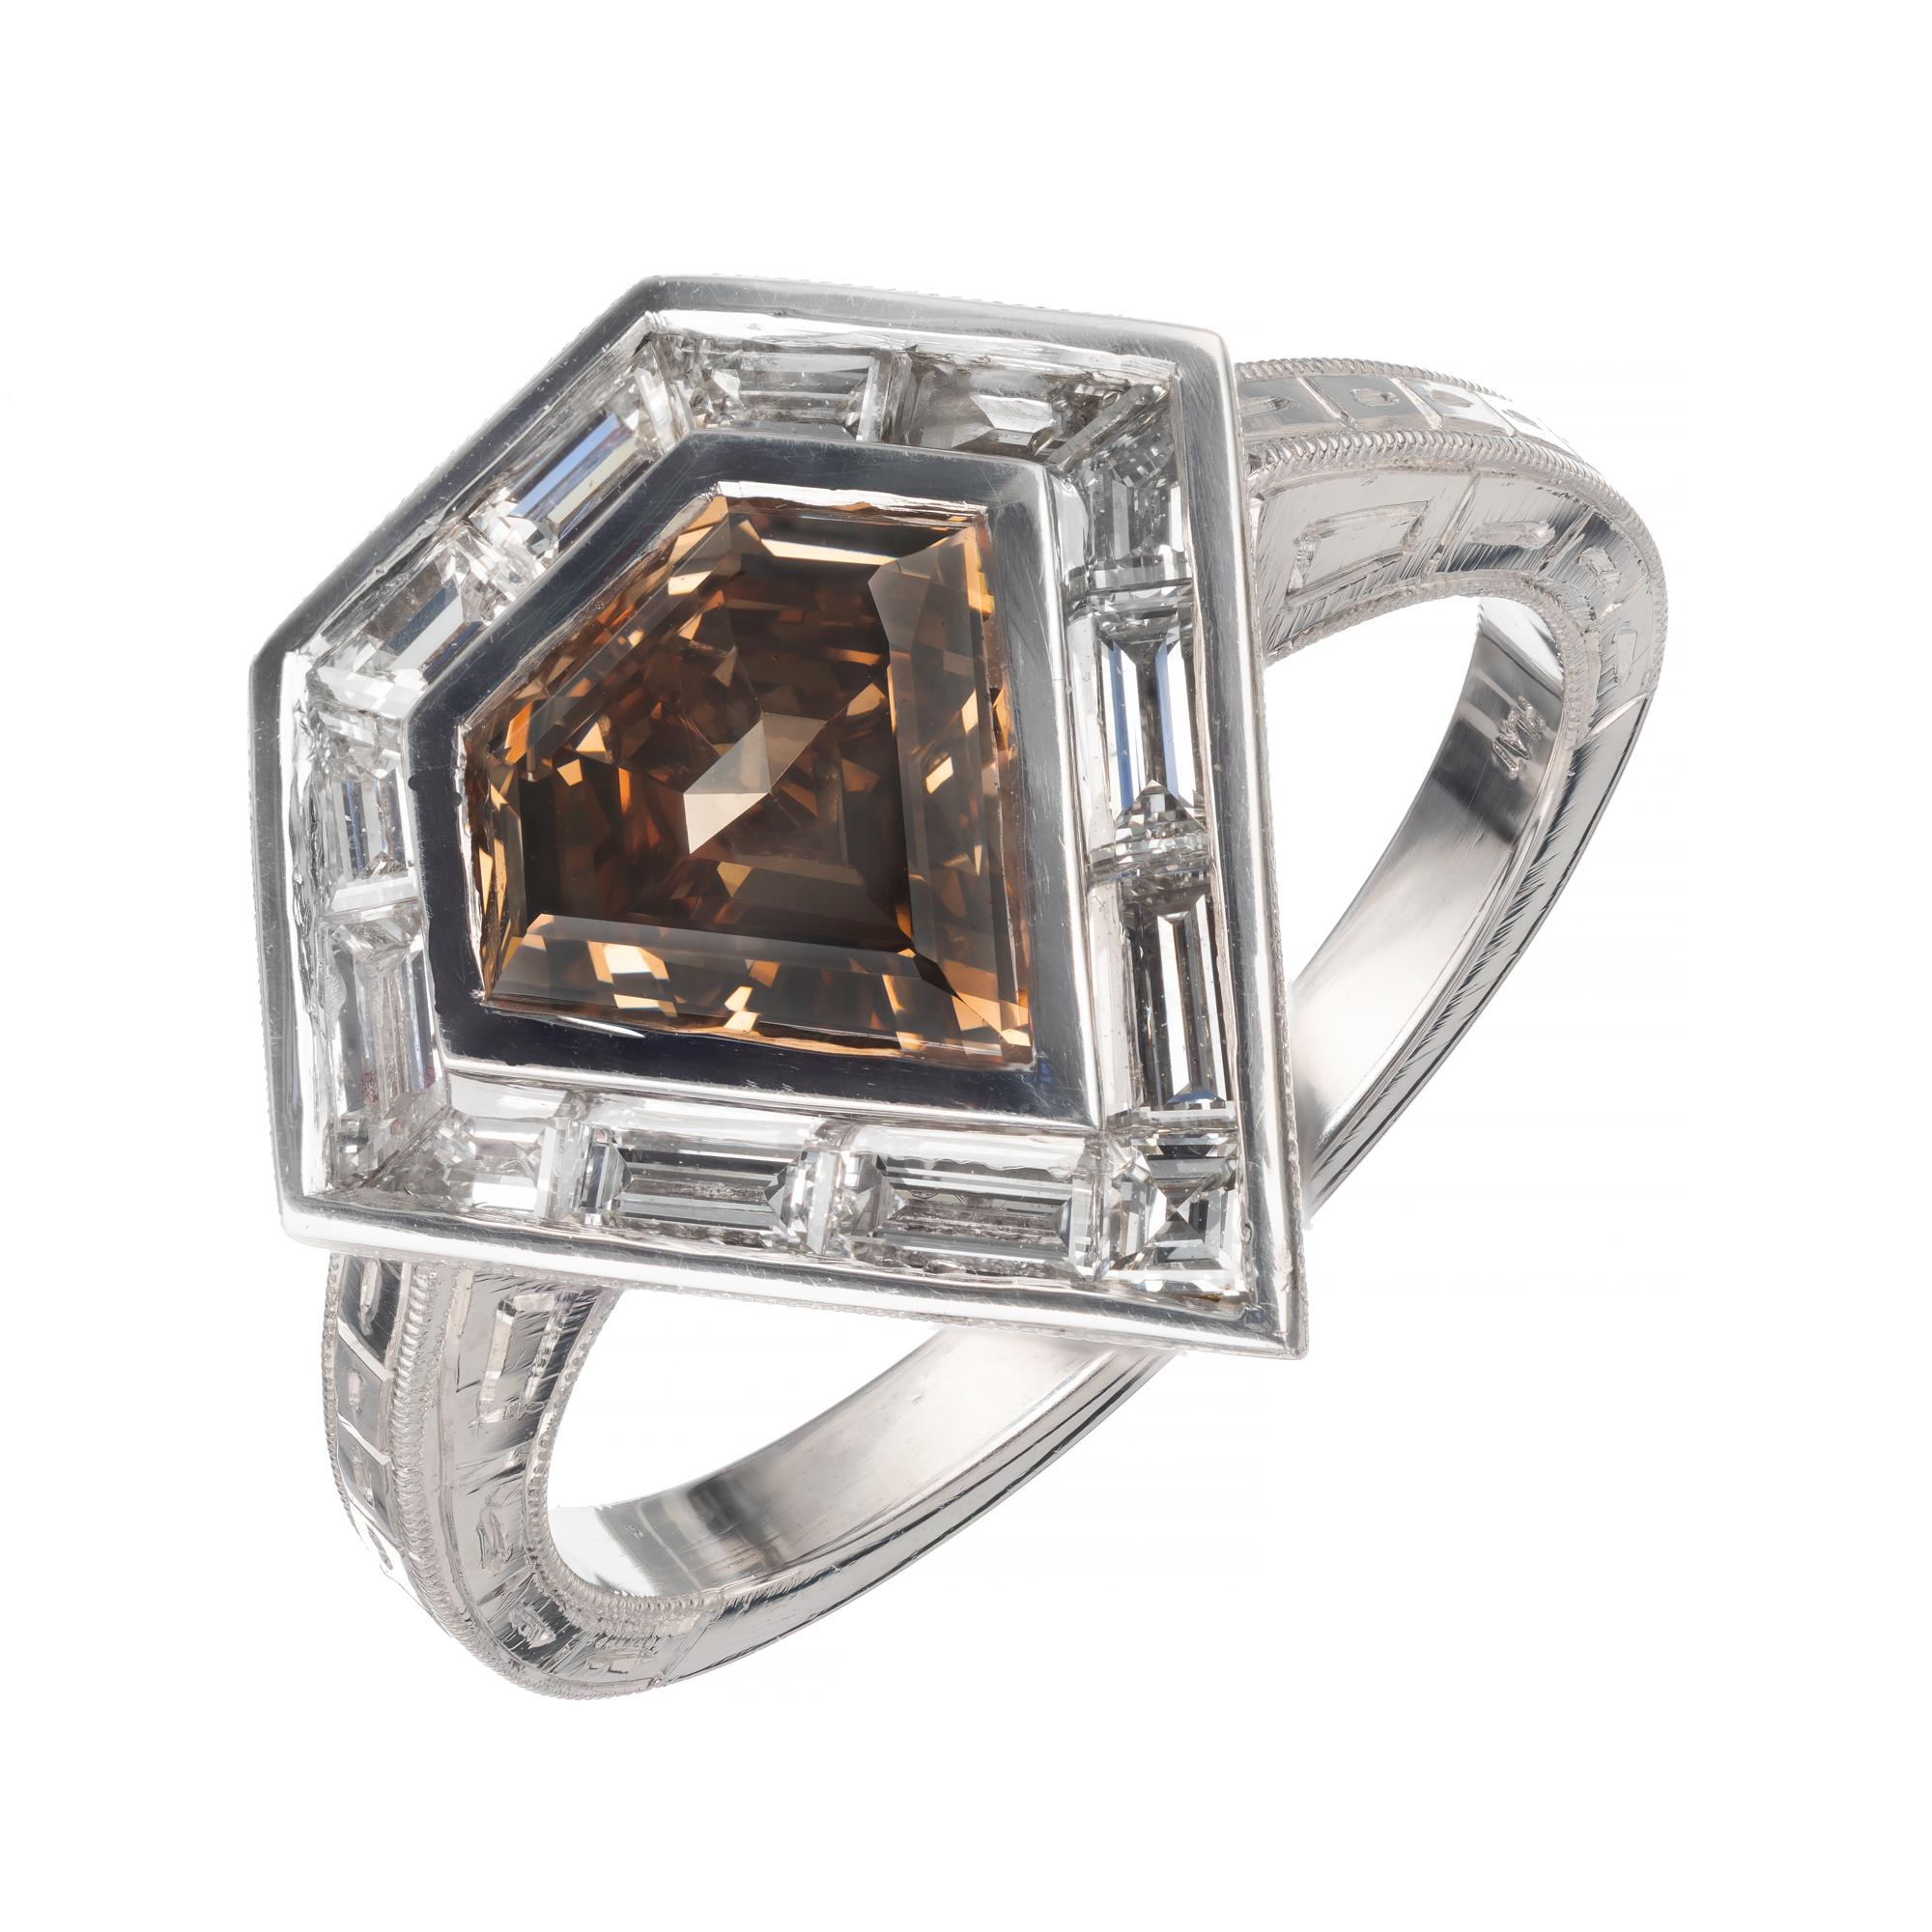 Brown Step cut shield shape diamond and white diamond halo engagement ring. GIA certified natural fancy yellow brown shield shaped center diamond. Set in a platinum setting with thirteen baguette diamonds. Designed in the Peter Suchy Workshop.  

1